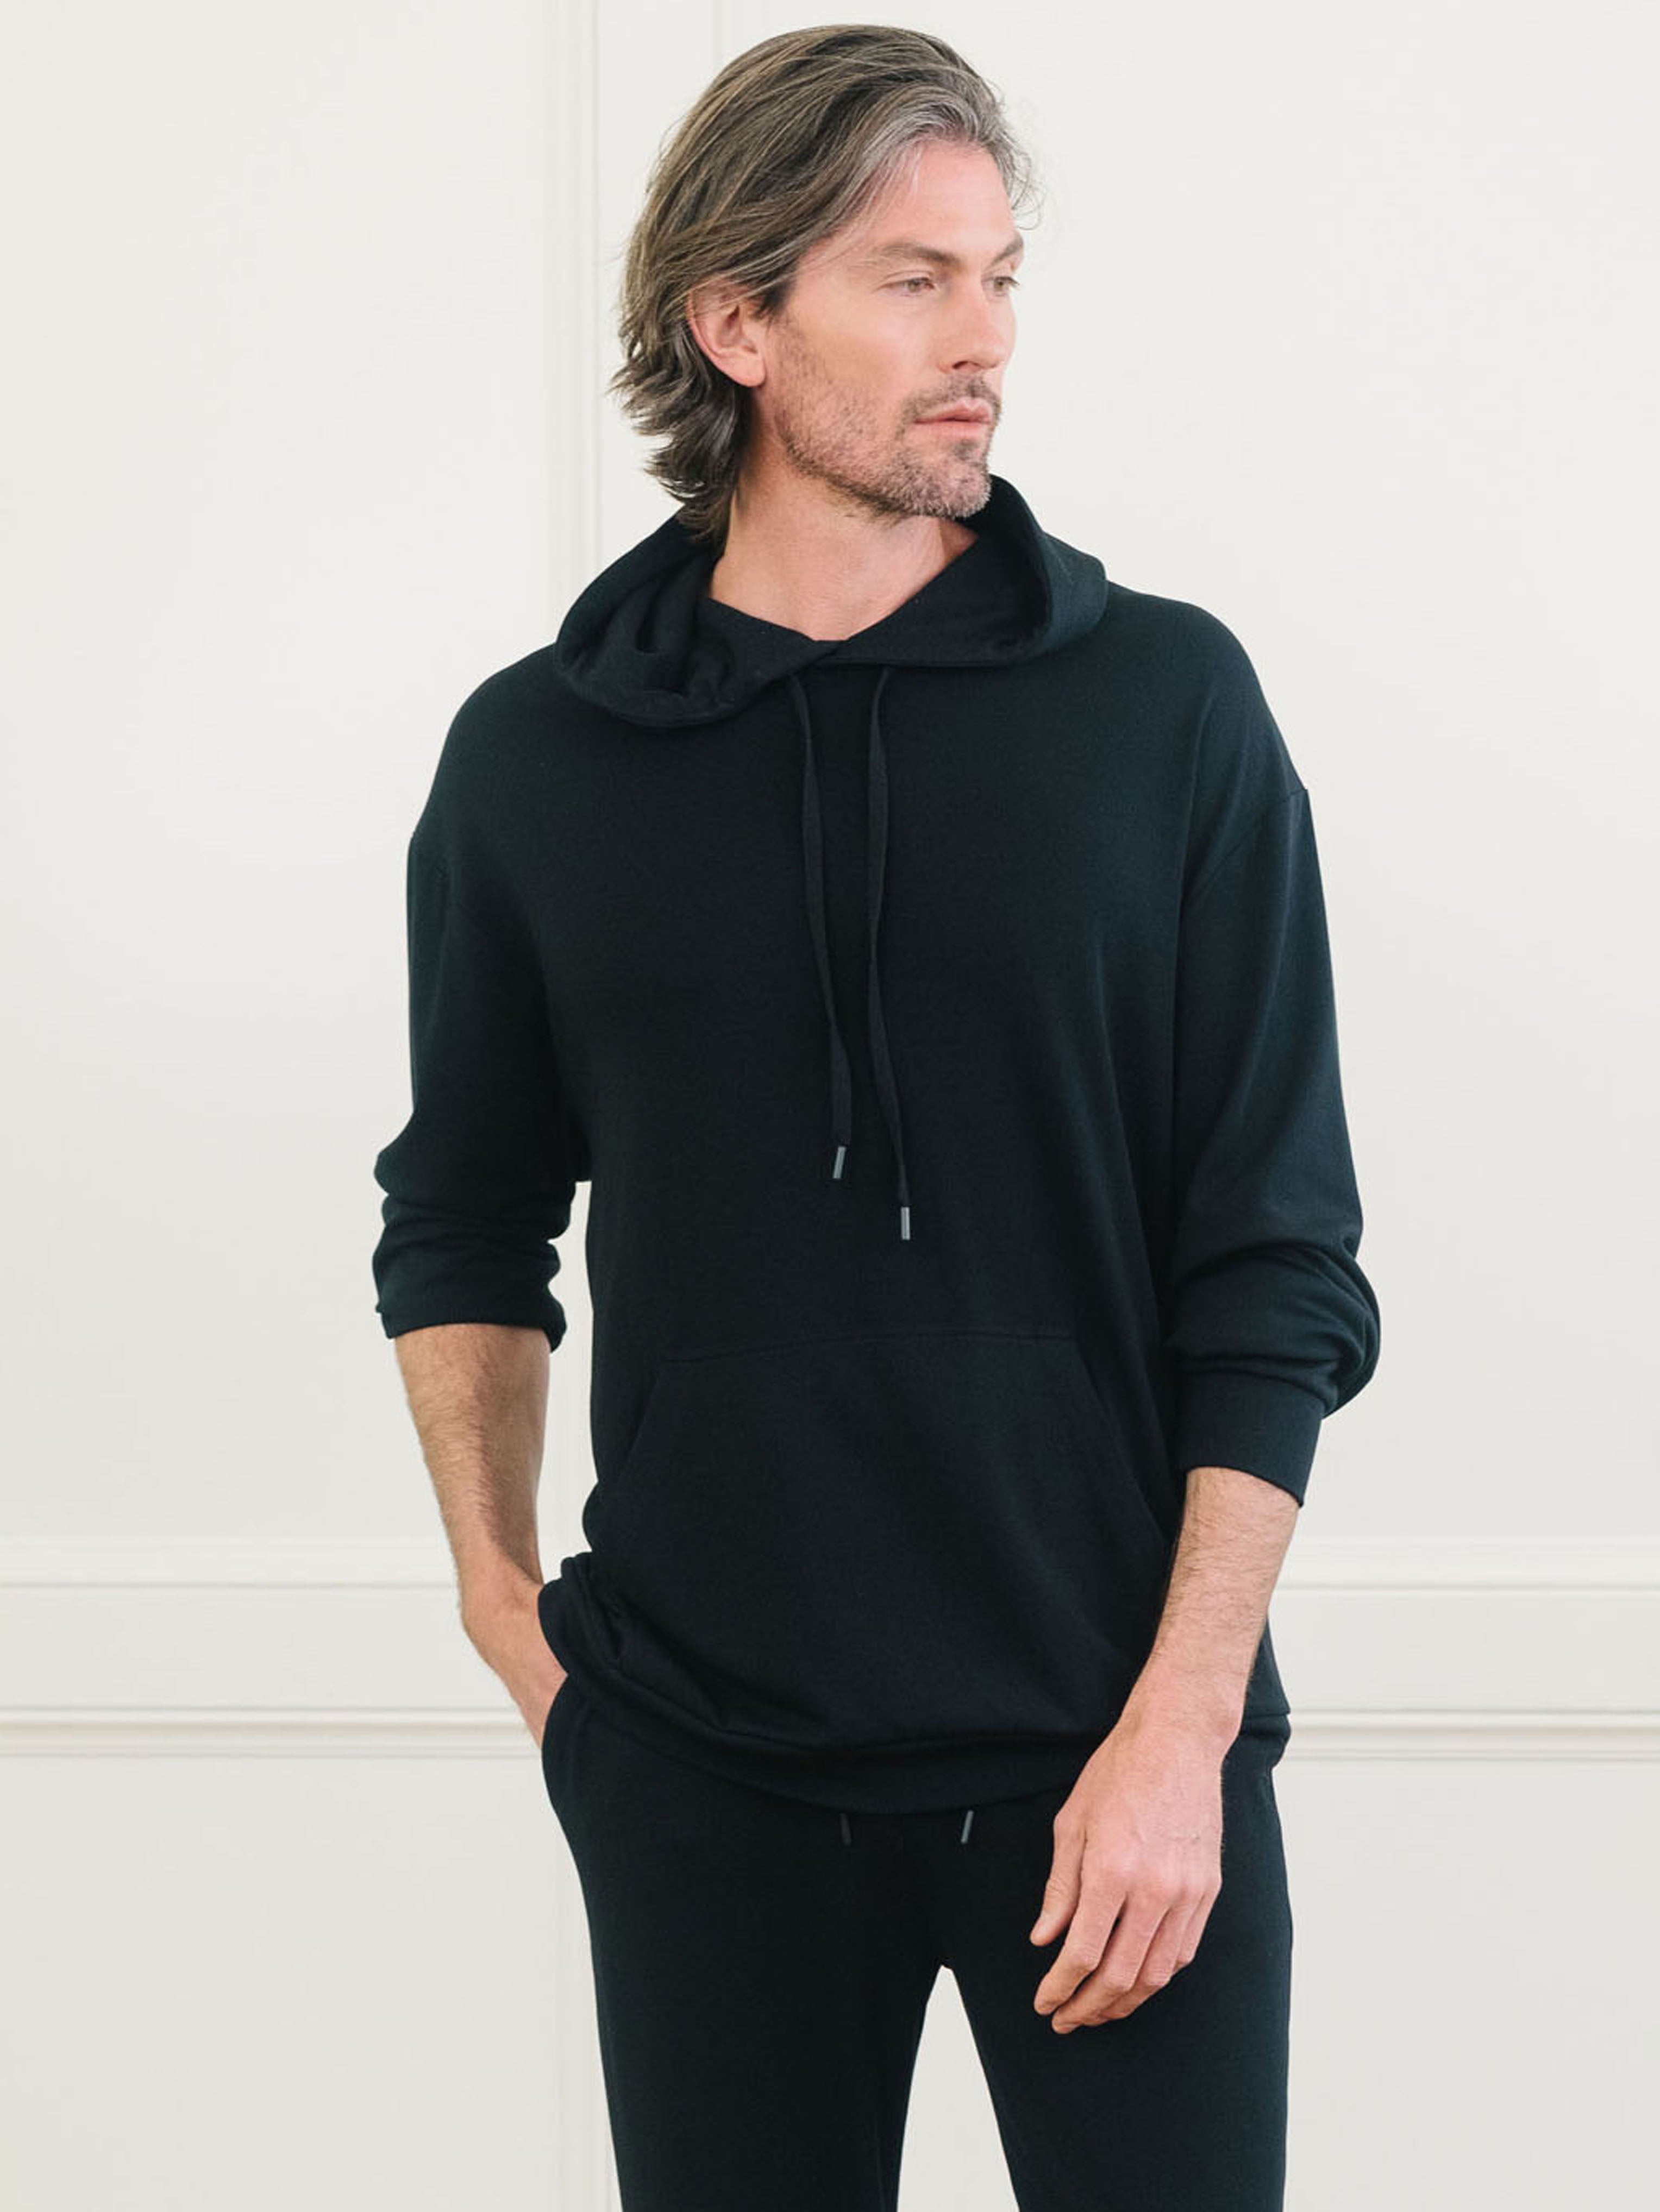 Black Bamboo Hoodie worn by man standing in front of white background.|Color:Black